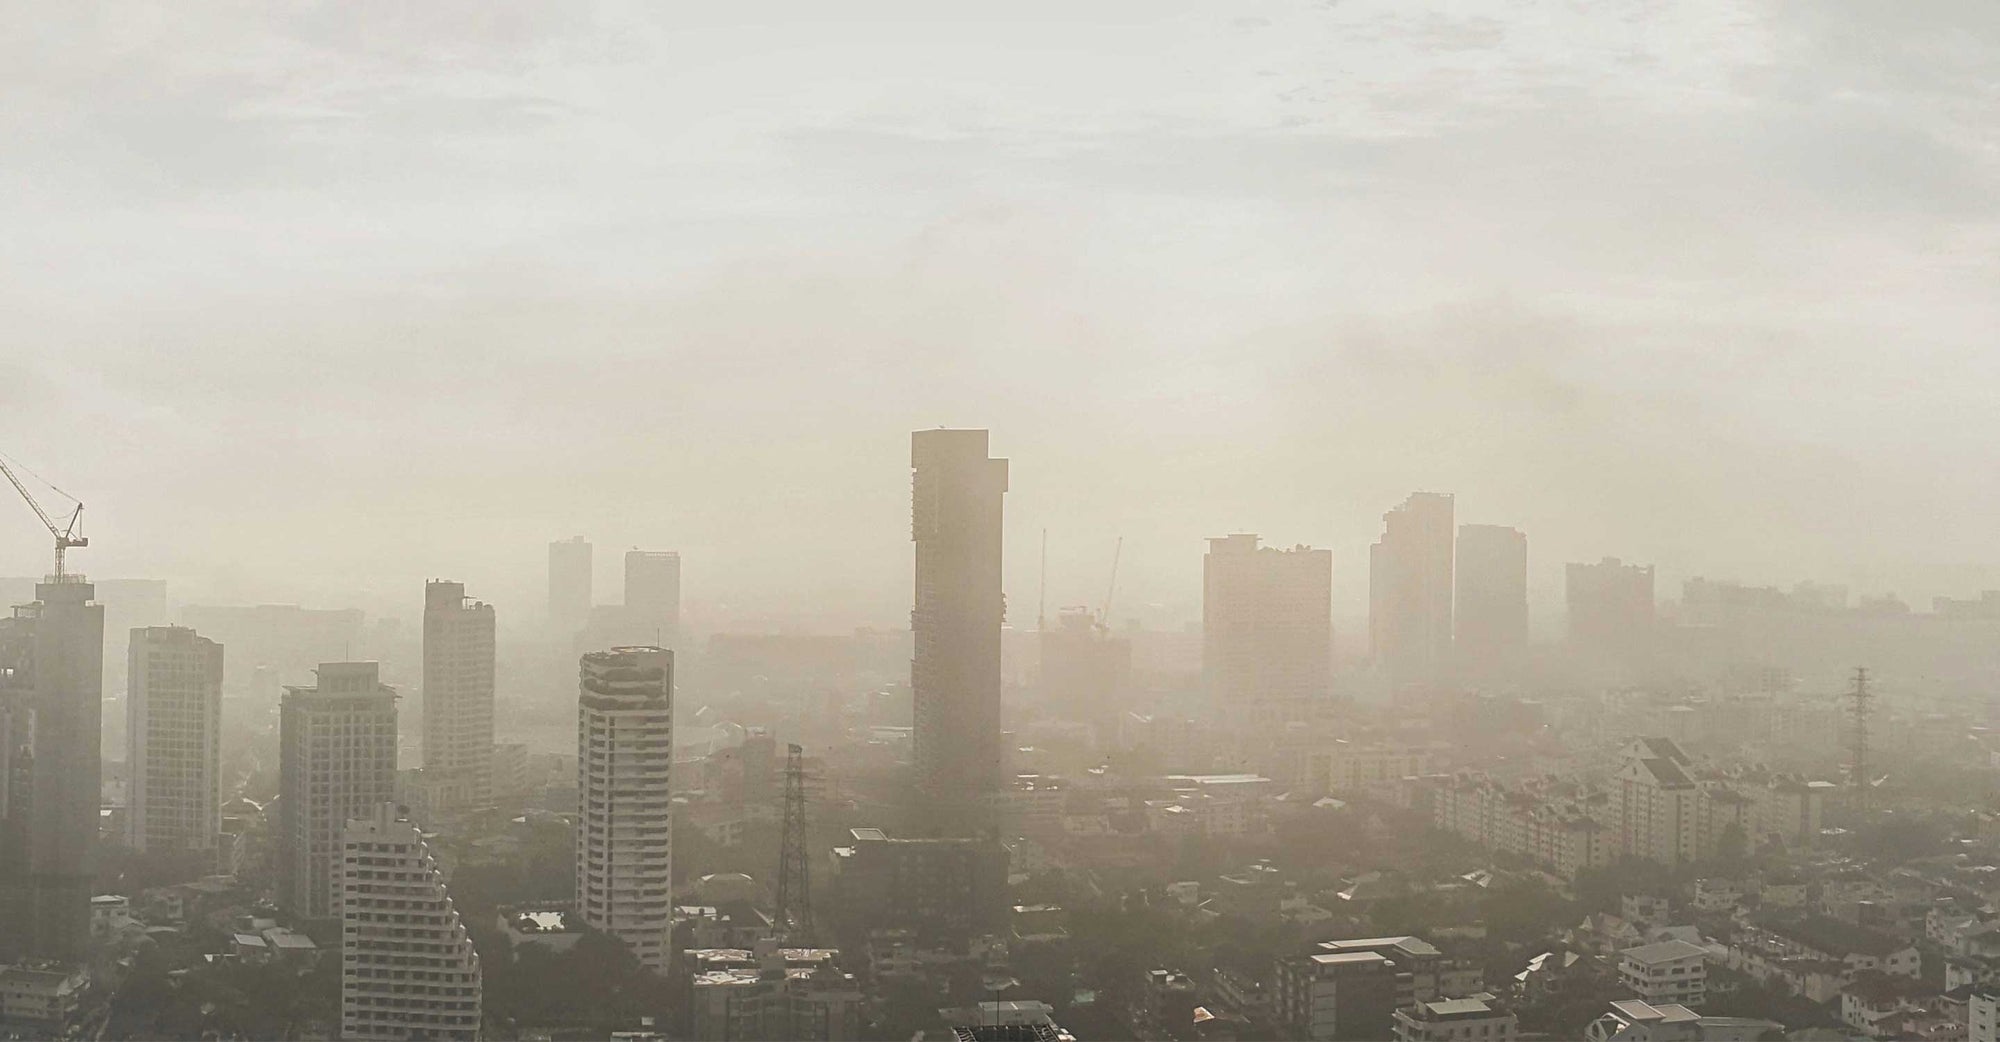 City with air pollution